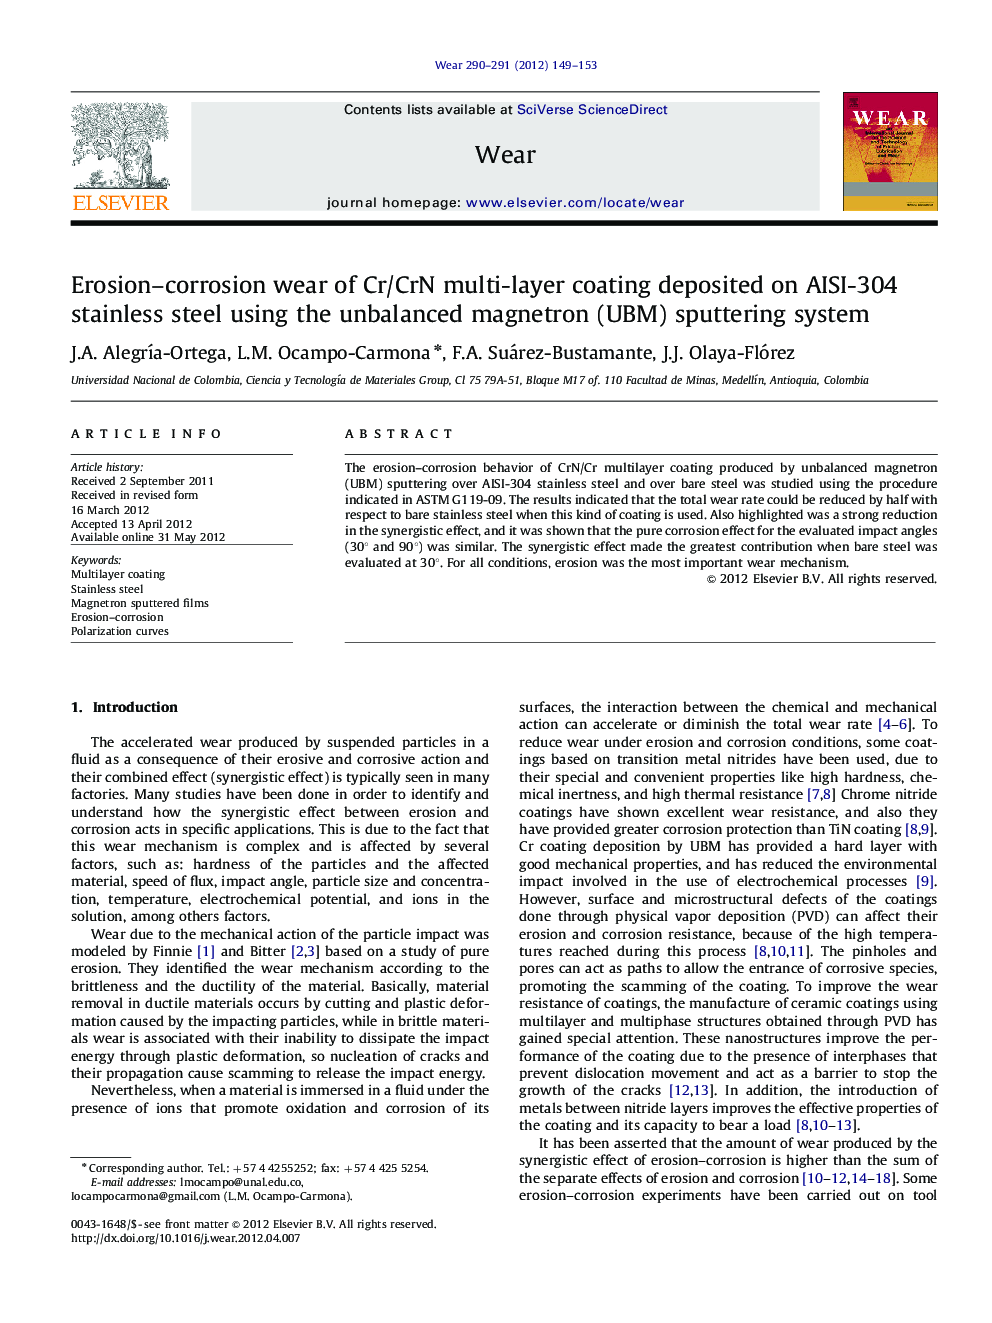 Erosion–corrosion wear of Cr/CrN multi-layer coating deposited on AISI-304 stainless steel using the unbalanced magnetron (UBM) sputtering system